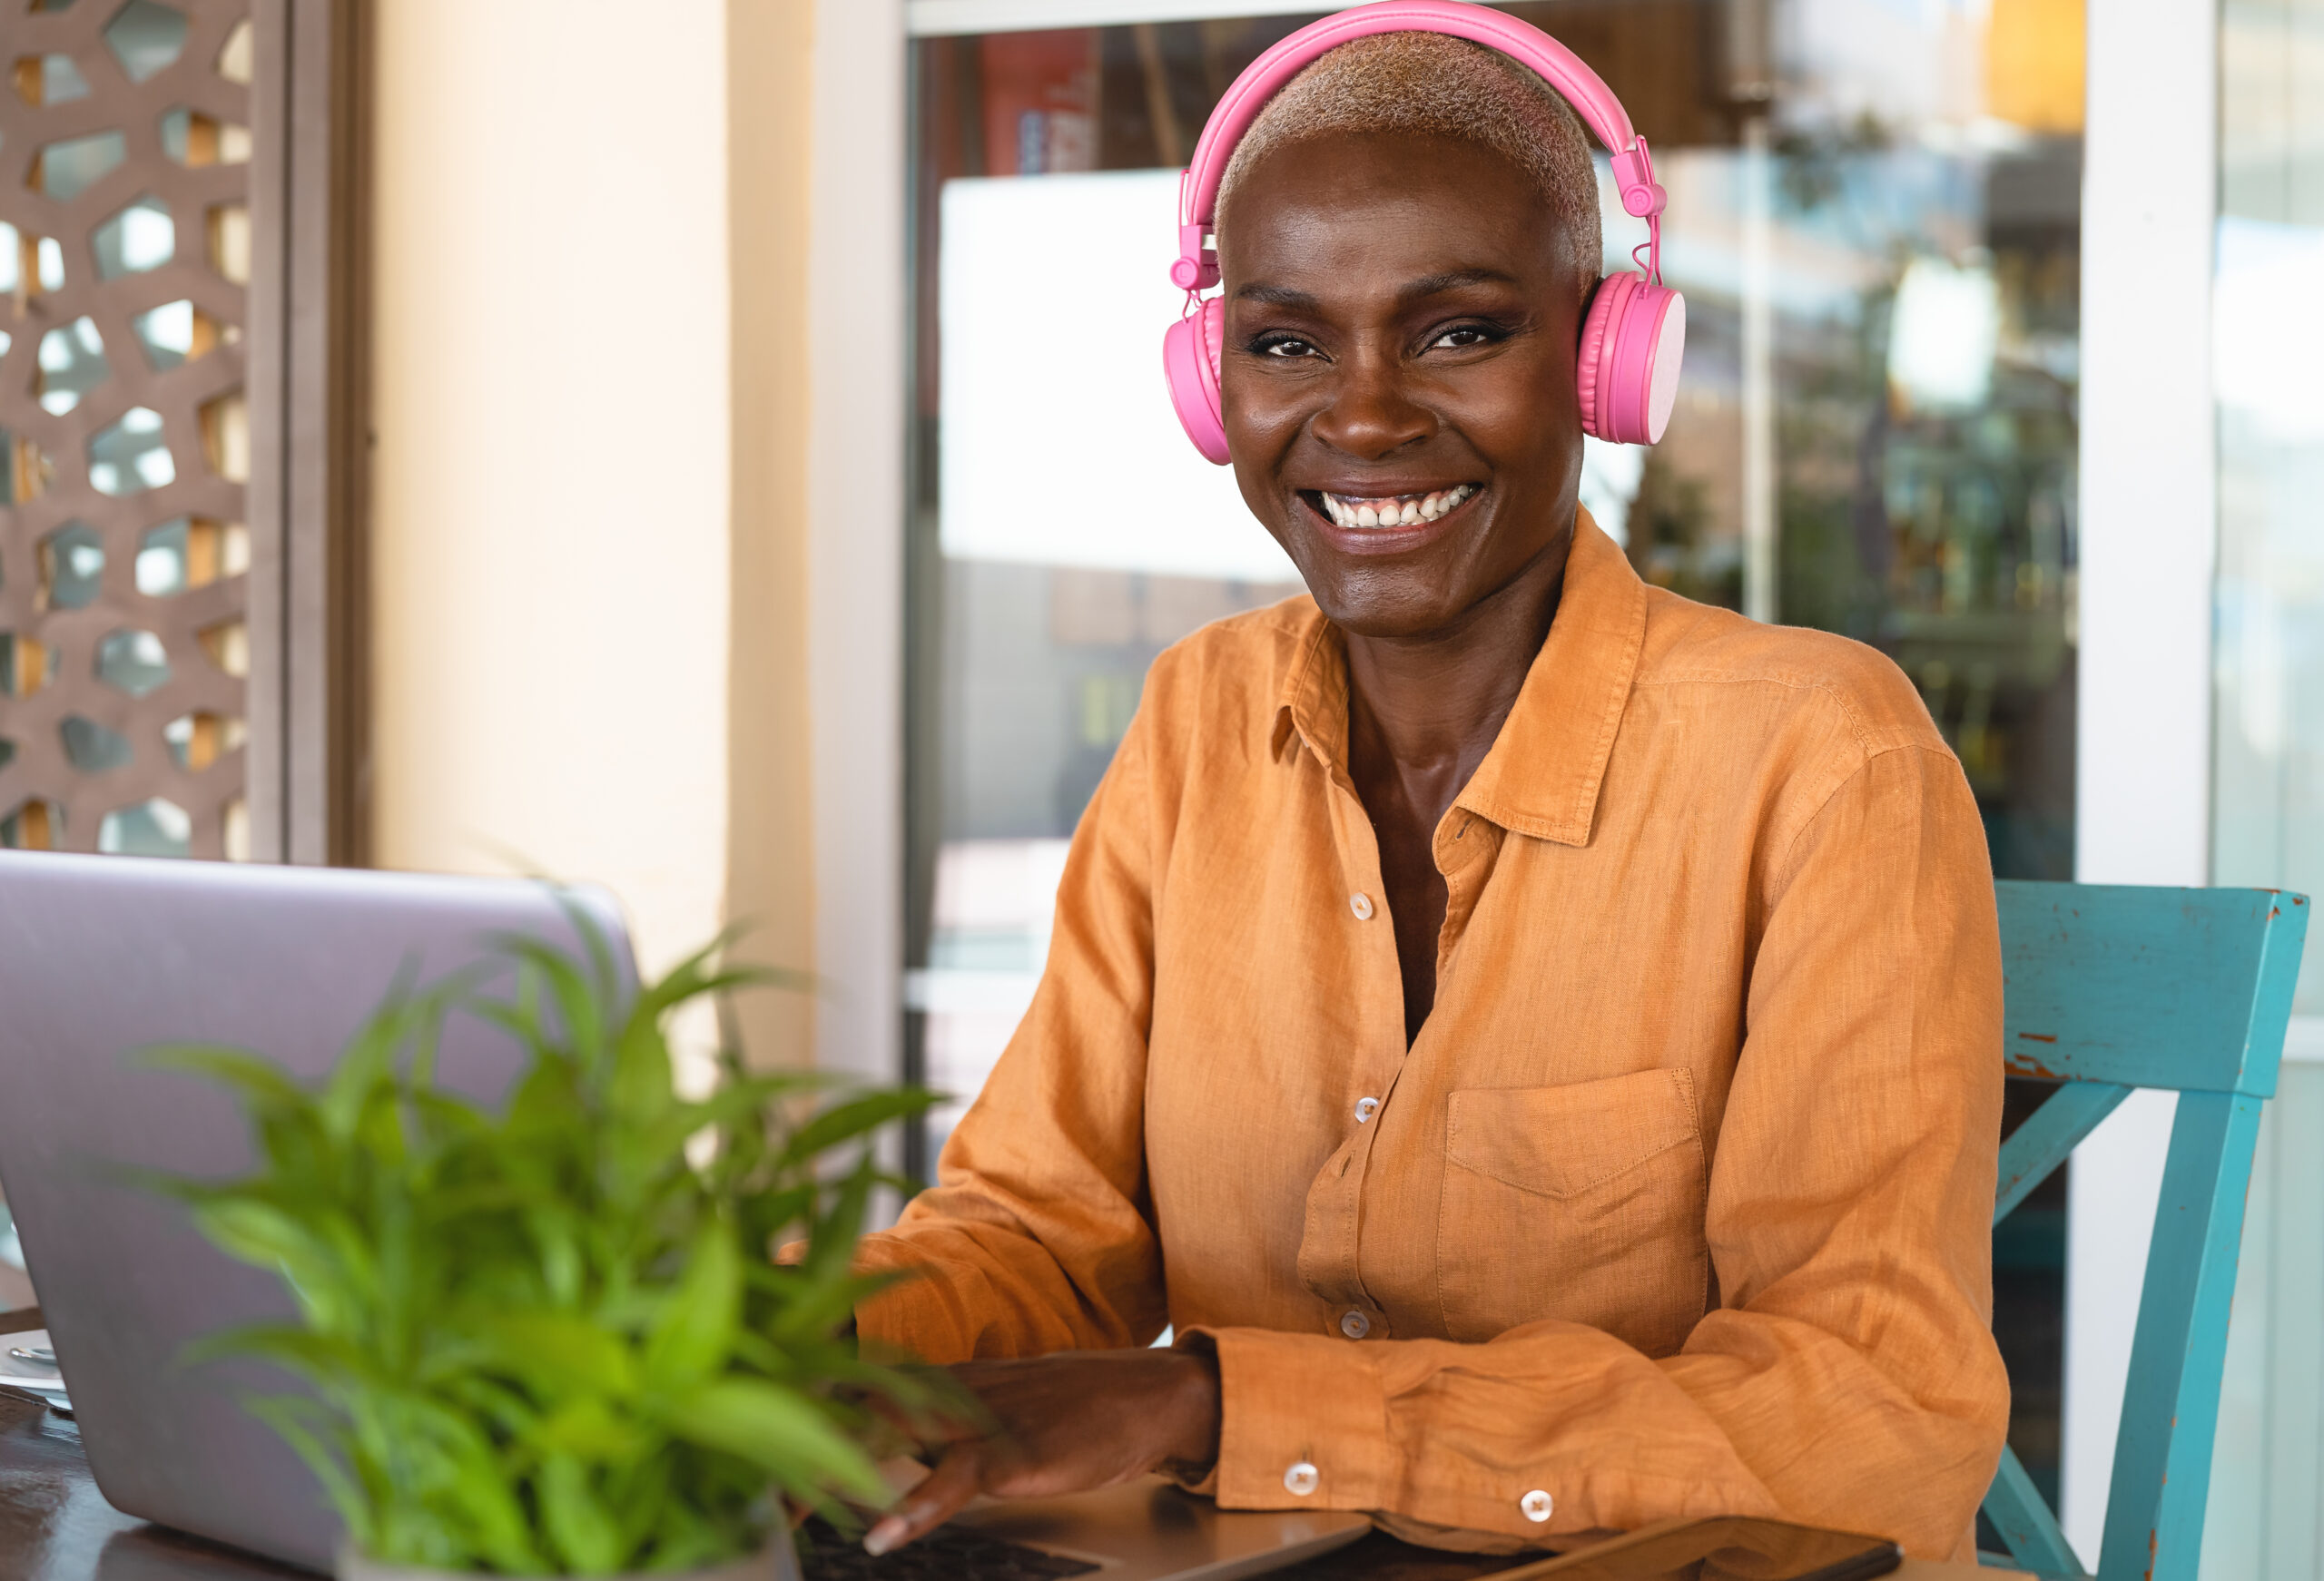 Smiling African woman using laptop and listening music with headphones in bar restaurant - Digital nomad and freelance lifestyle concept